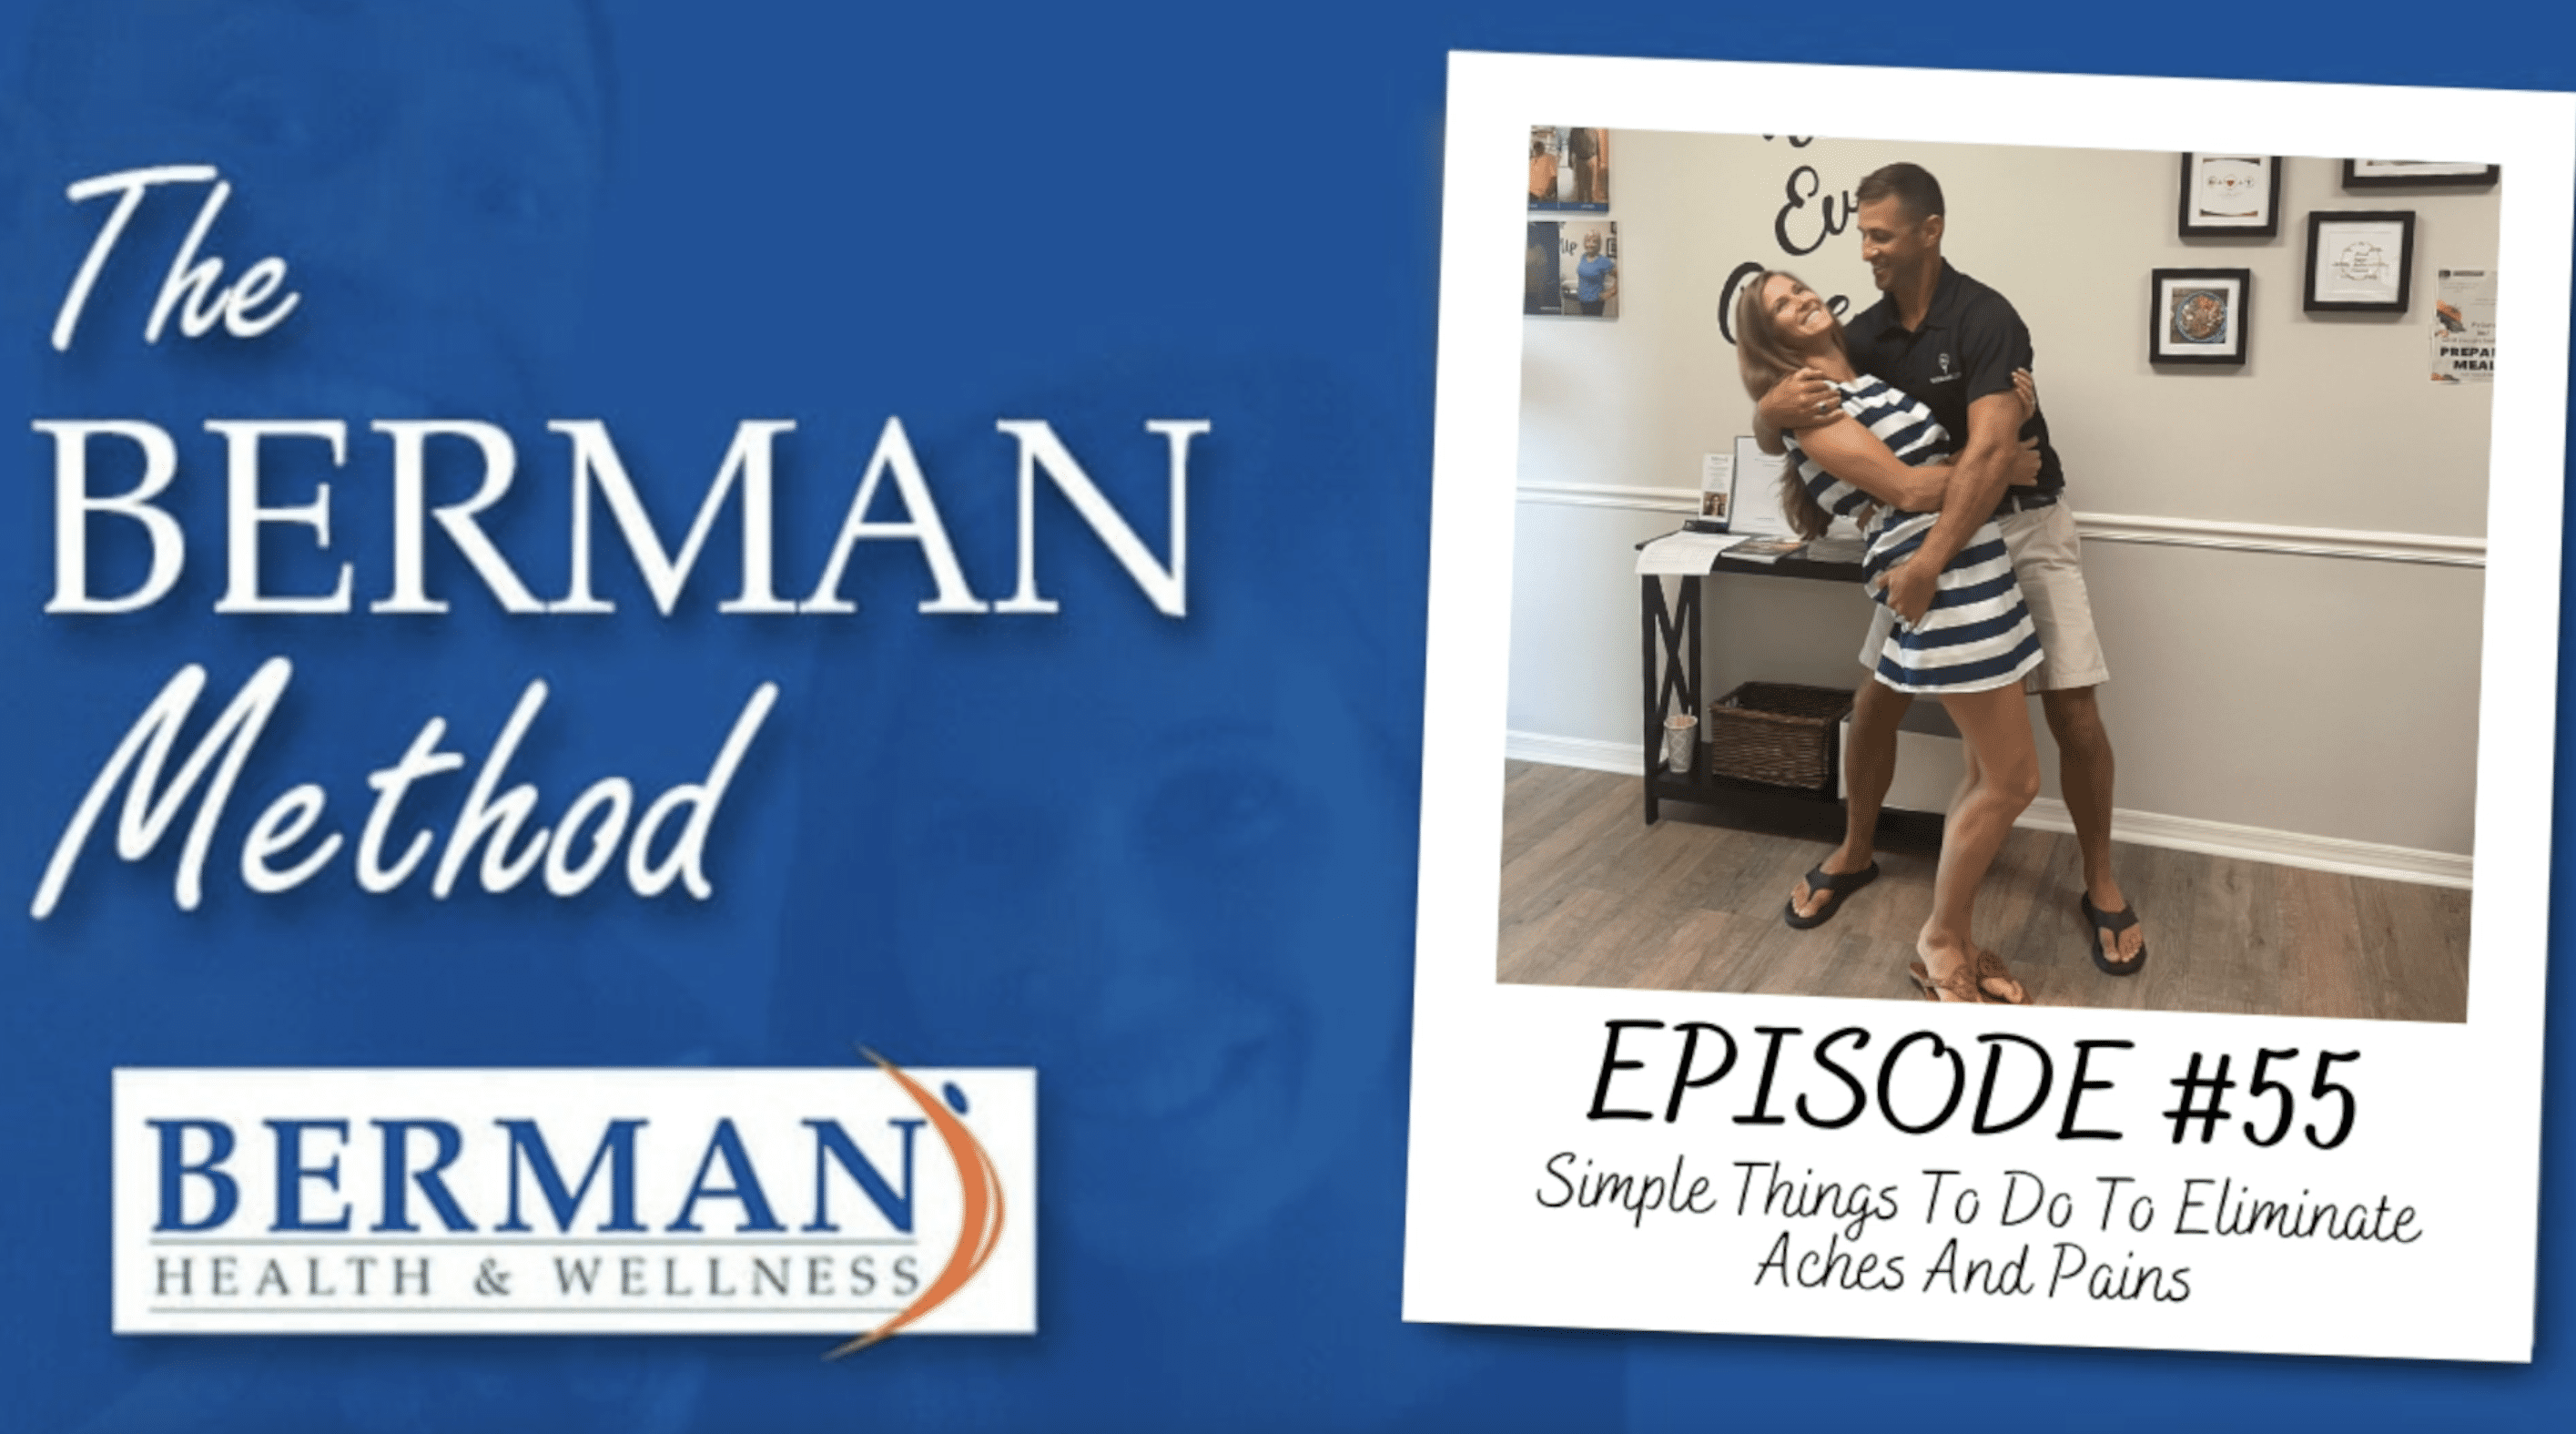 Episode 55: Simple Things To Do To Eliminate Aches And Pains